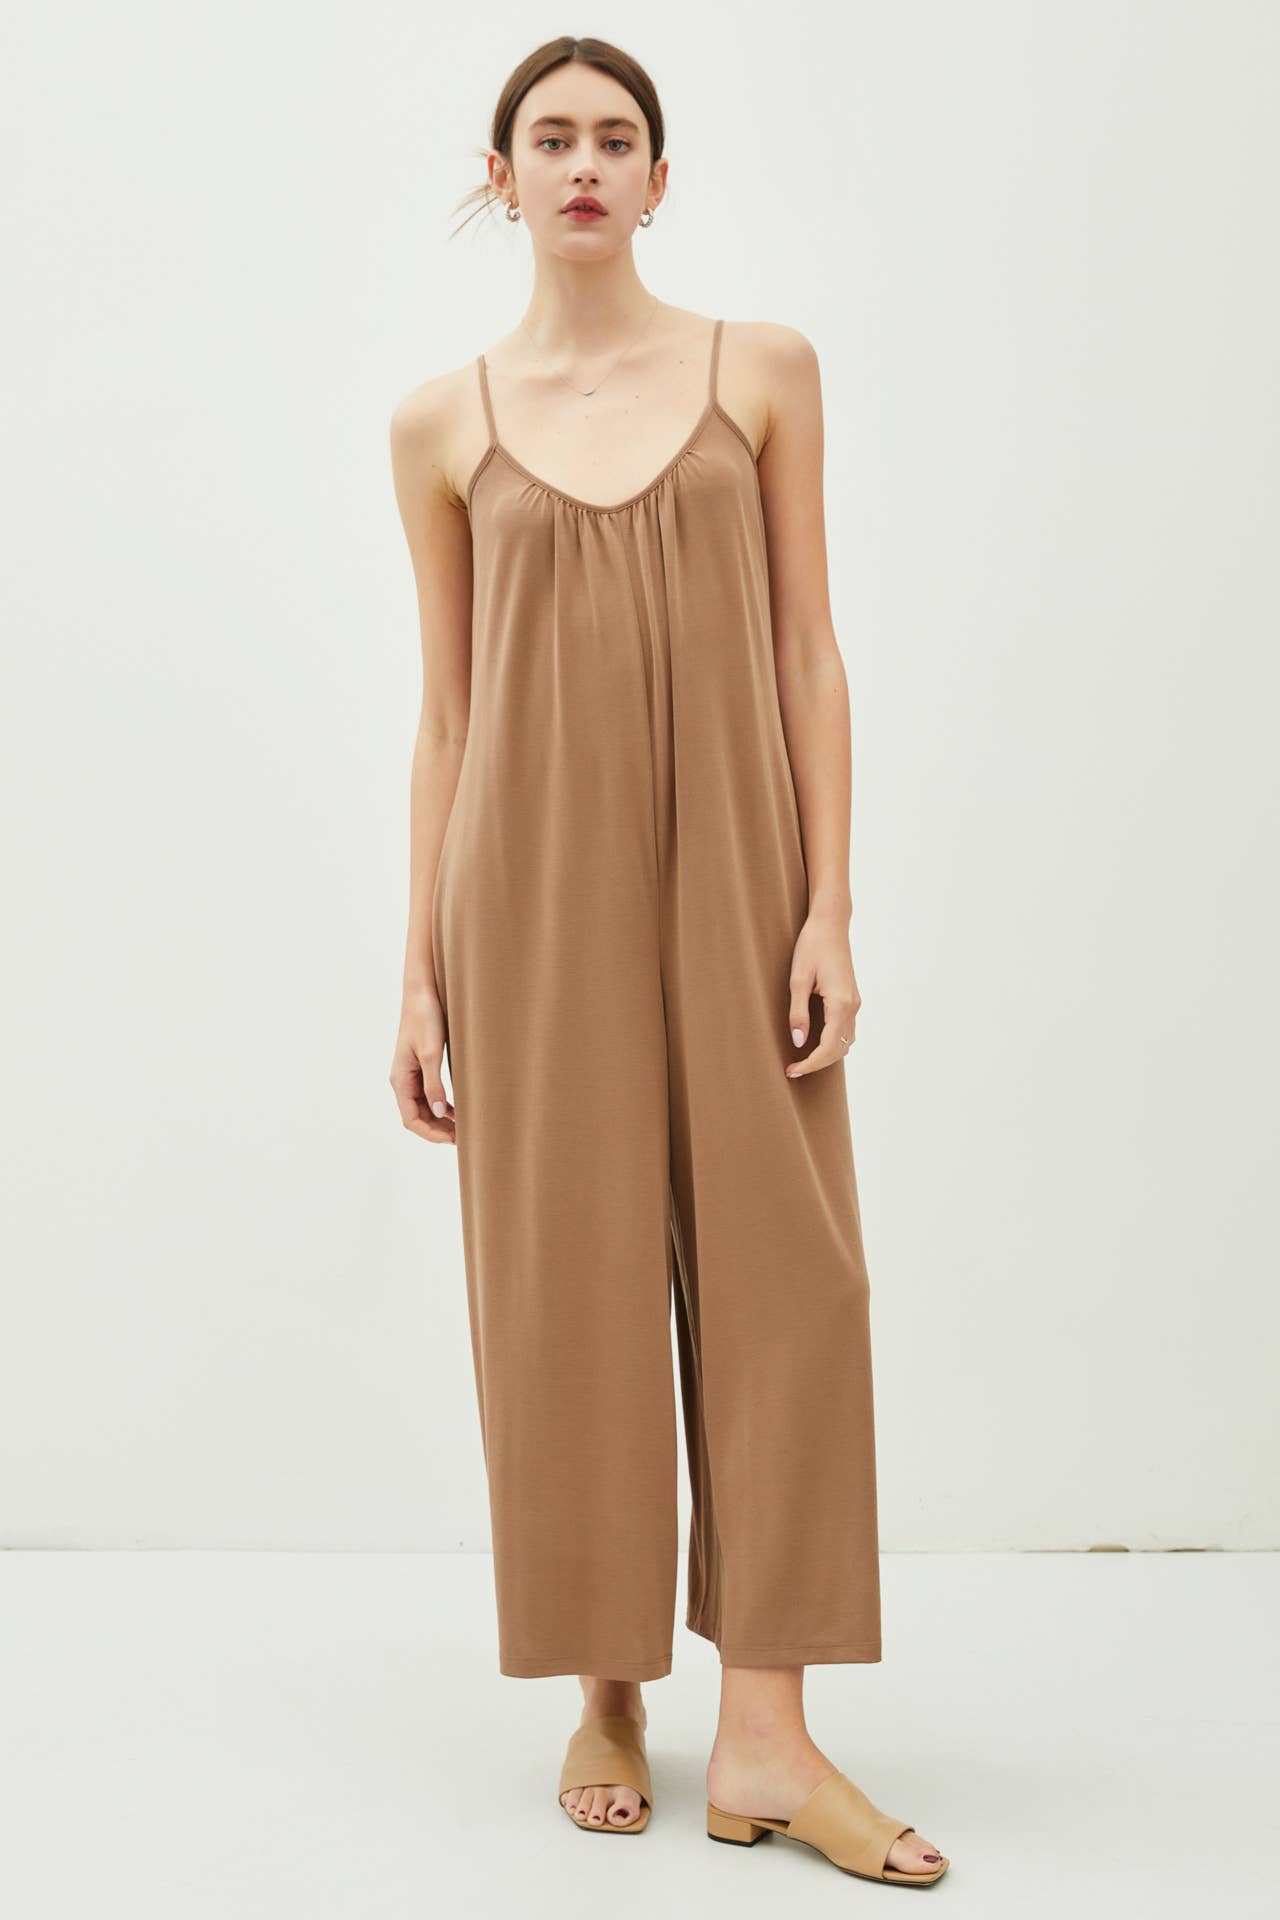 Jaime - MODAL JERSEY WIDE LEG BABYDOLL JUMPSUIT by Be Cool